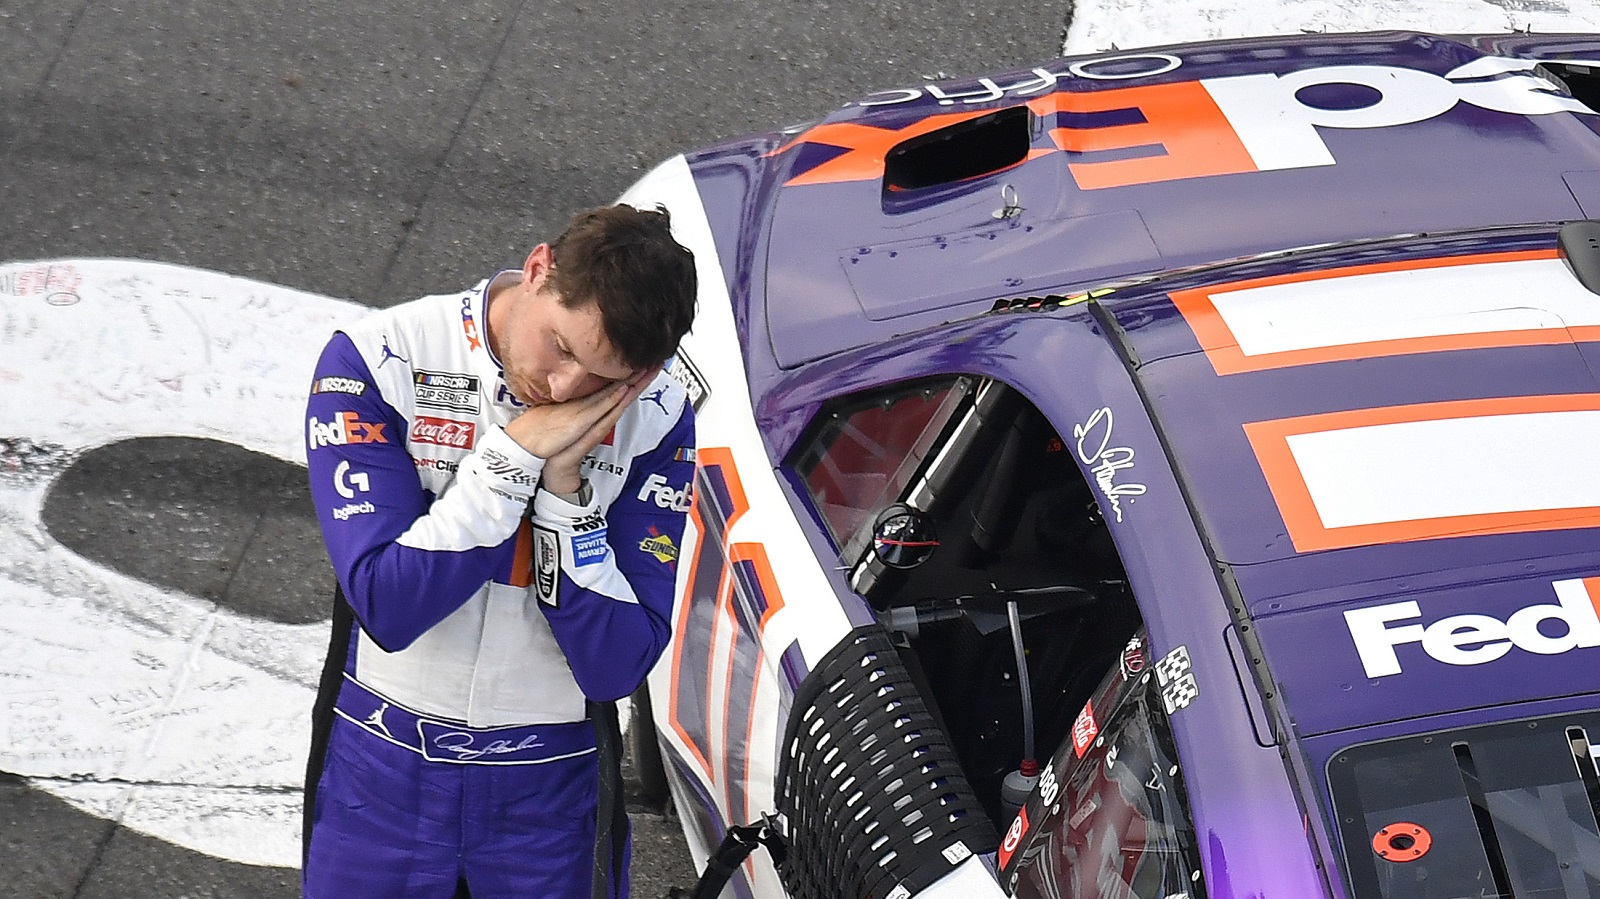 Denny Hamlin pretends to catch some nap time after winning the NASCAR Cup Series M&M's Fan Appreciation 400 at Pocono Raceway on July 24, 2022. | Logan Riely/Getty Images